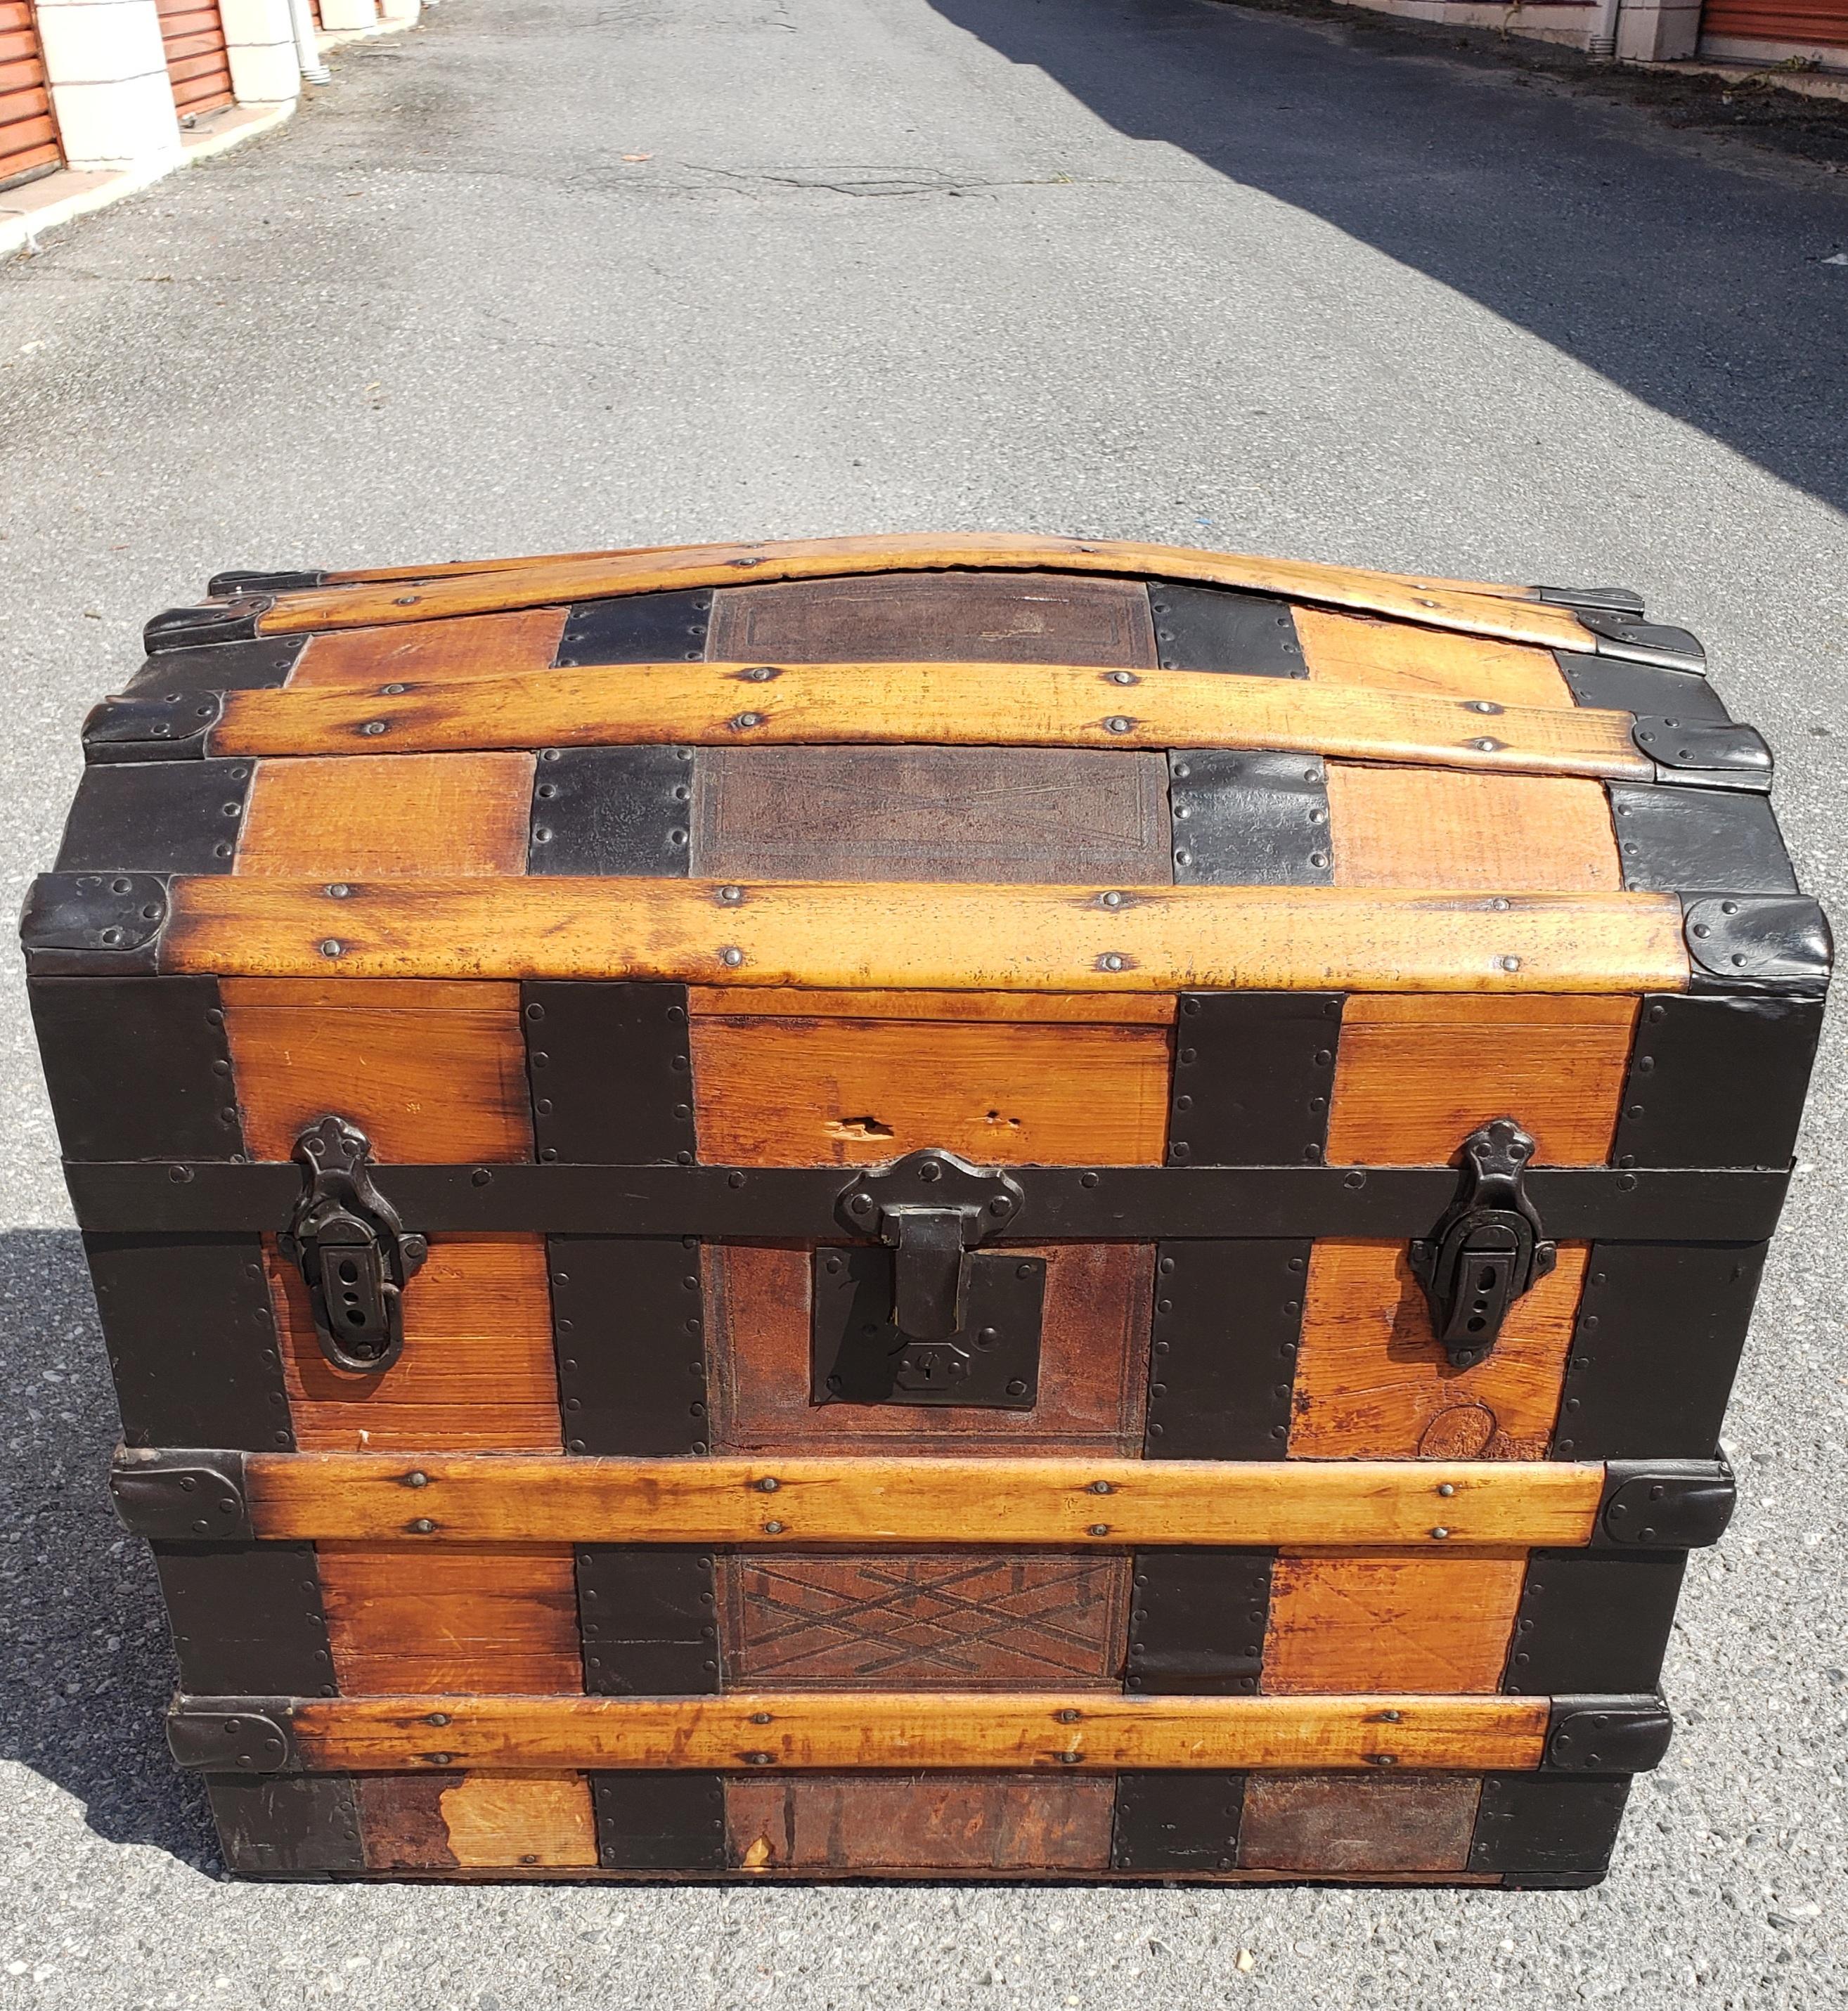 Early 20th Century American Rolling pine Blanket Trunk. Textile lined interior. Functional Leather handles.  Measures 28.5